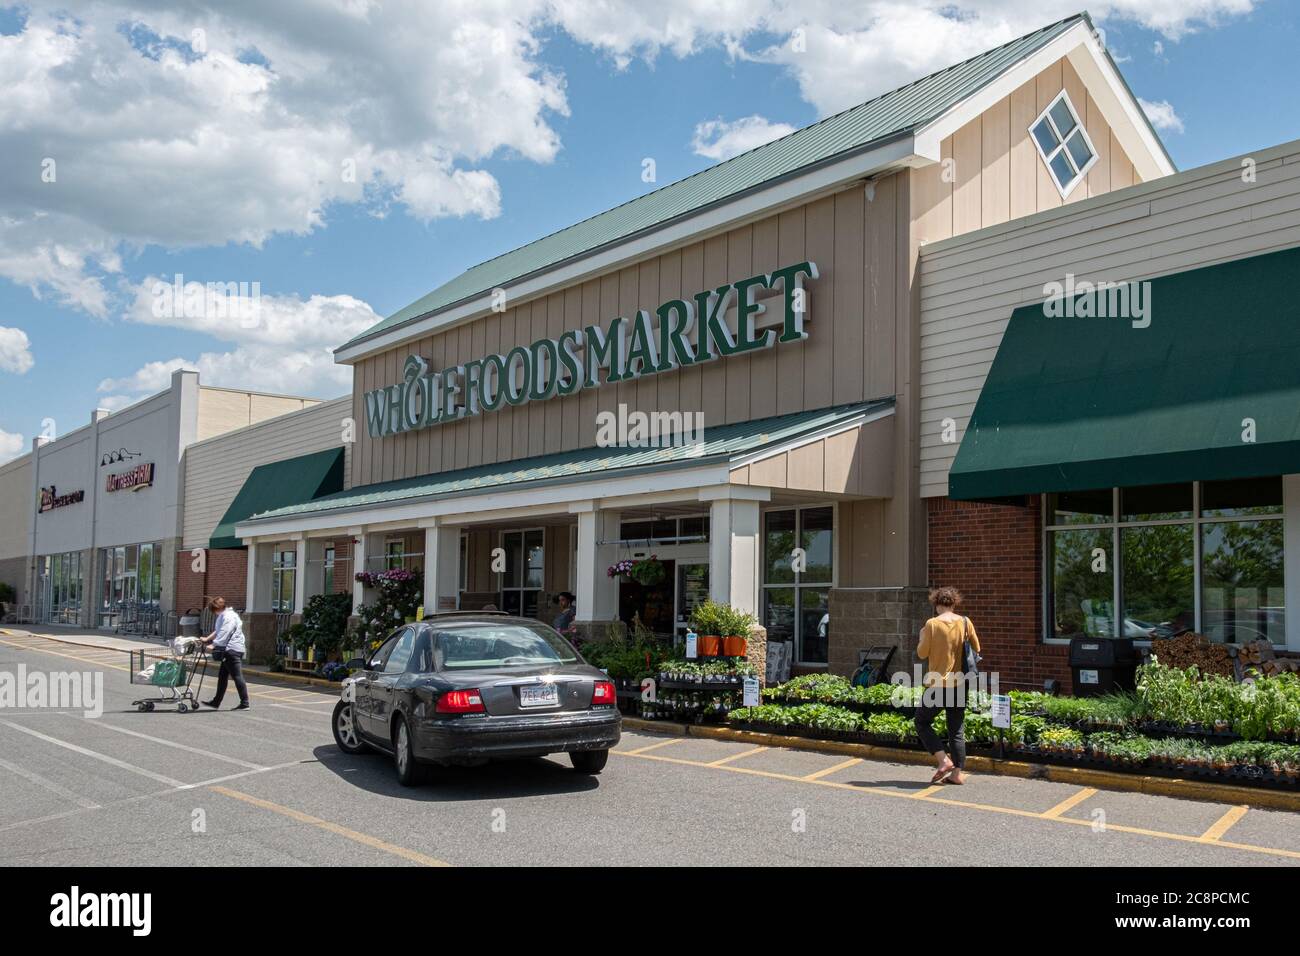 Whole Foods Grocery Store in Hadley, Massachusetts Stock Photo